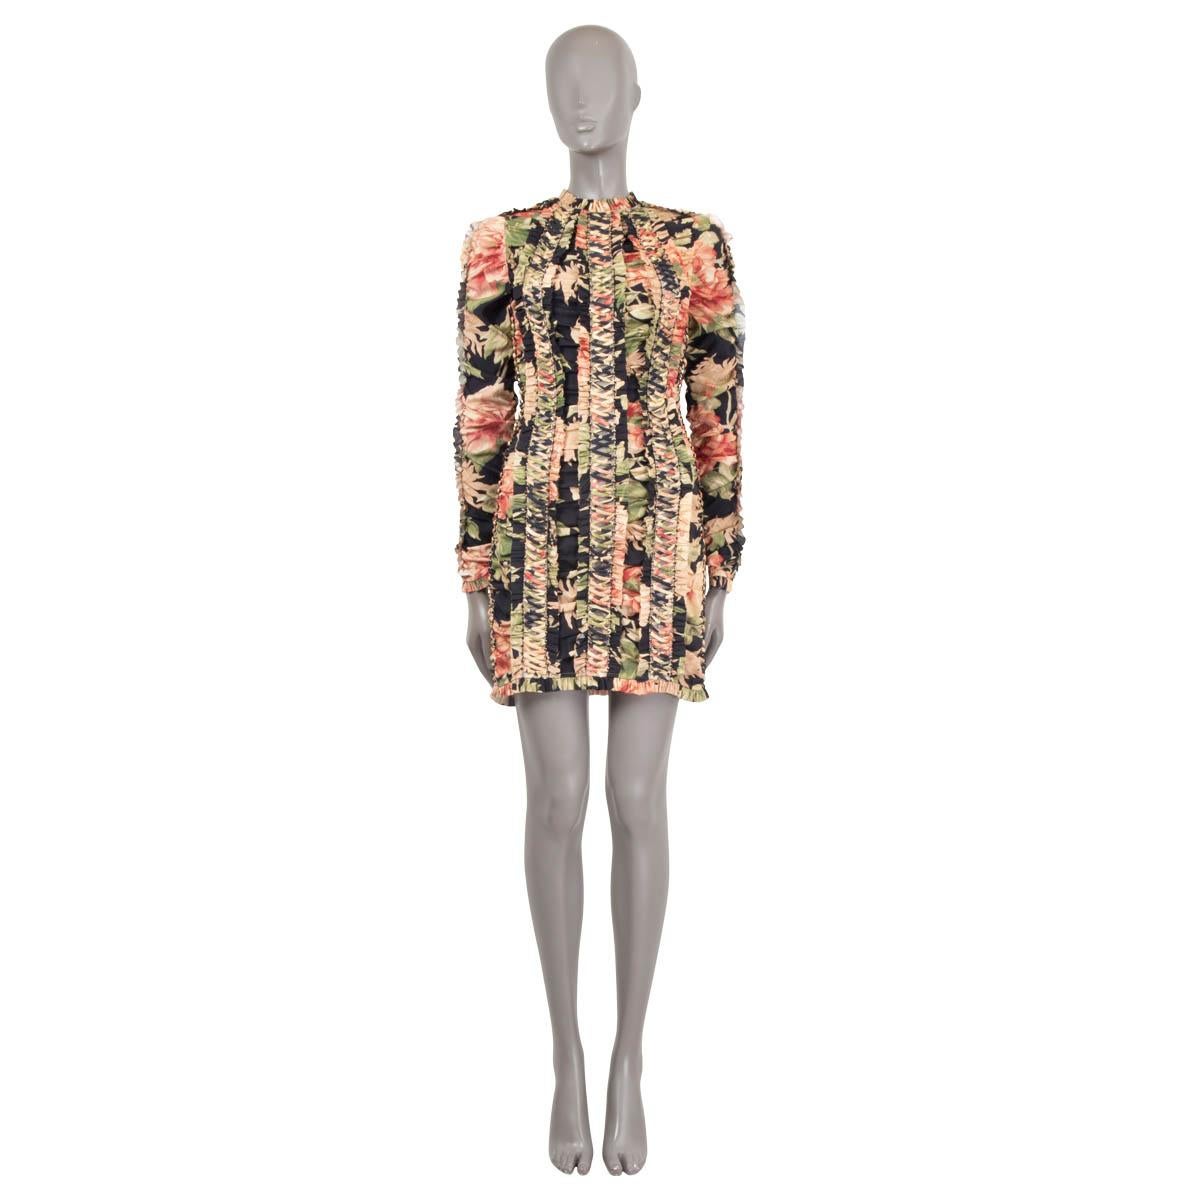 100% authentic Zimmermann Espionage lace-up pencil mini dress in black stretch-silk (with 7% elastane) and floral-print in pink, nude and green. Features lace-up panels which are outlined with delicate ruffles. Closes with a concealed zipper in the